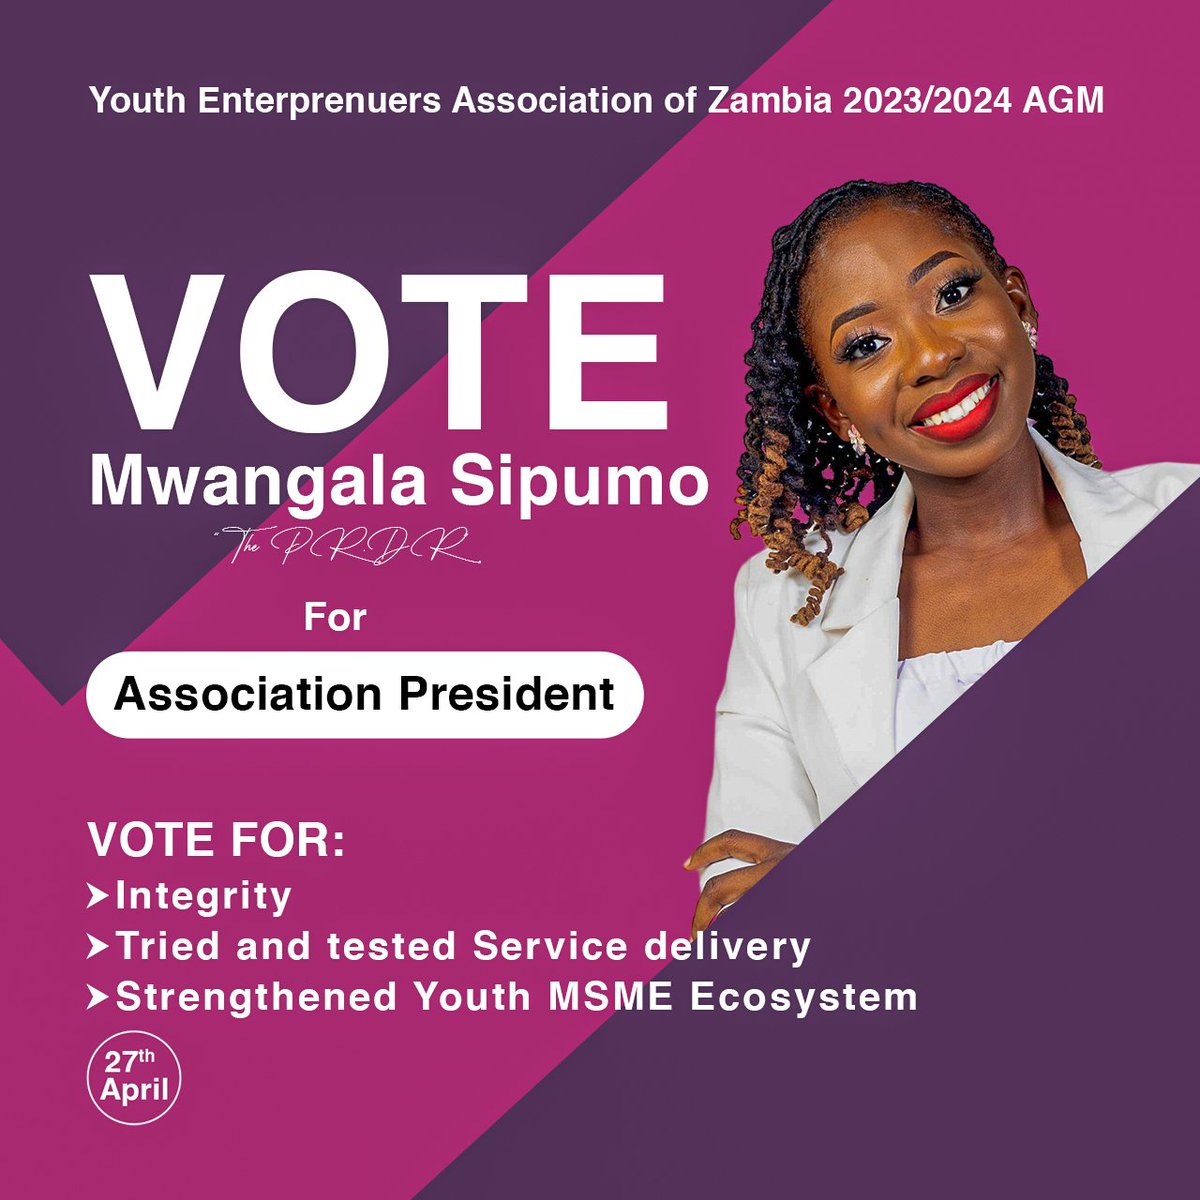 I'm excited to announce my candidacy for President in the upcoming YEAZ elections. If elected, I'll continue to prioritize strengthening of the Youth SME ecosystem through robust capacity building initiatives ensuring visibility for youthled SMEs & access to opportunities.